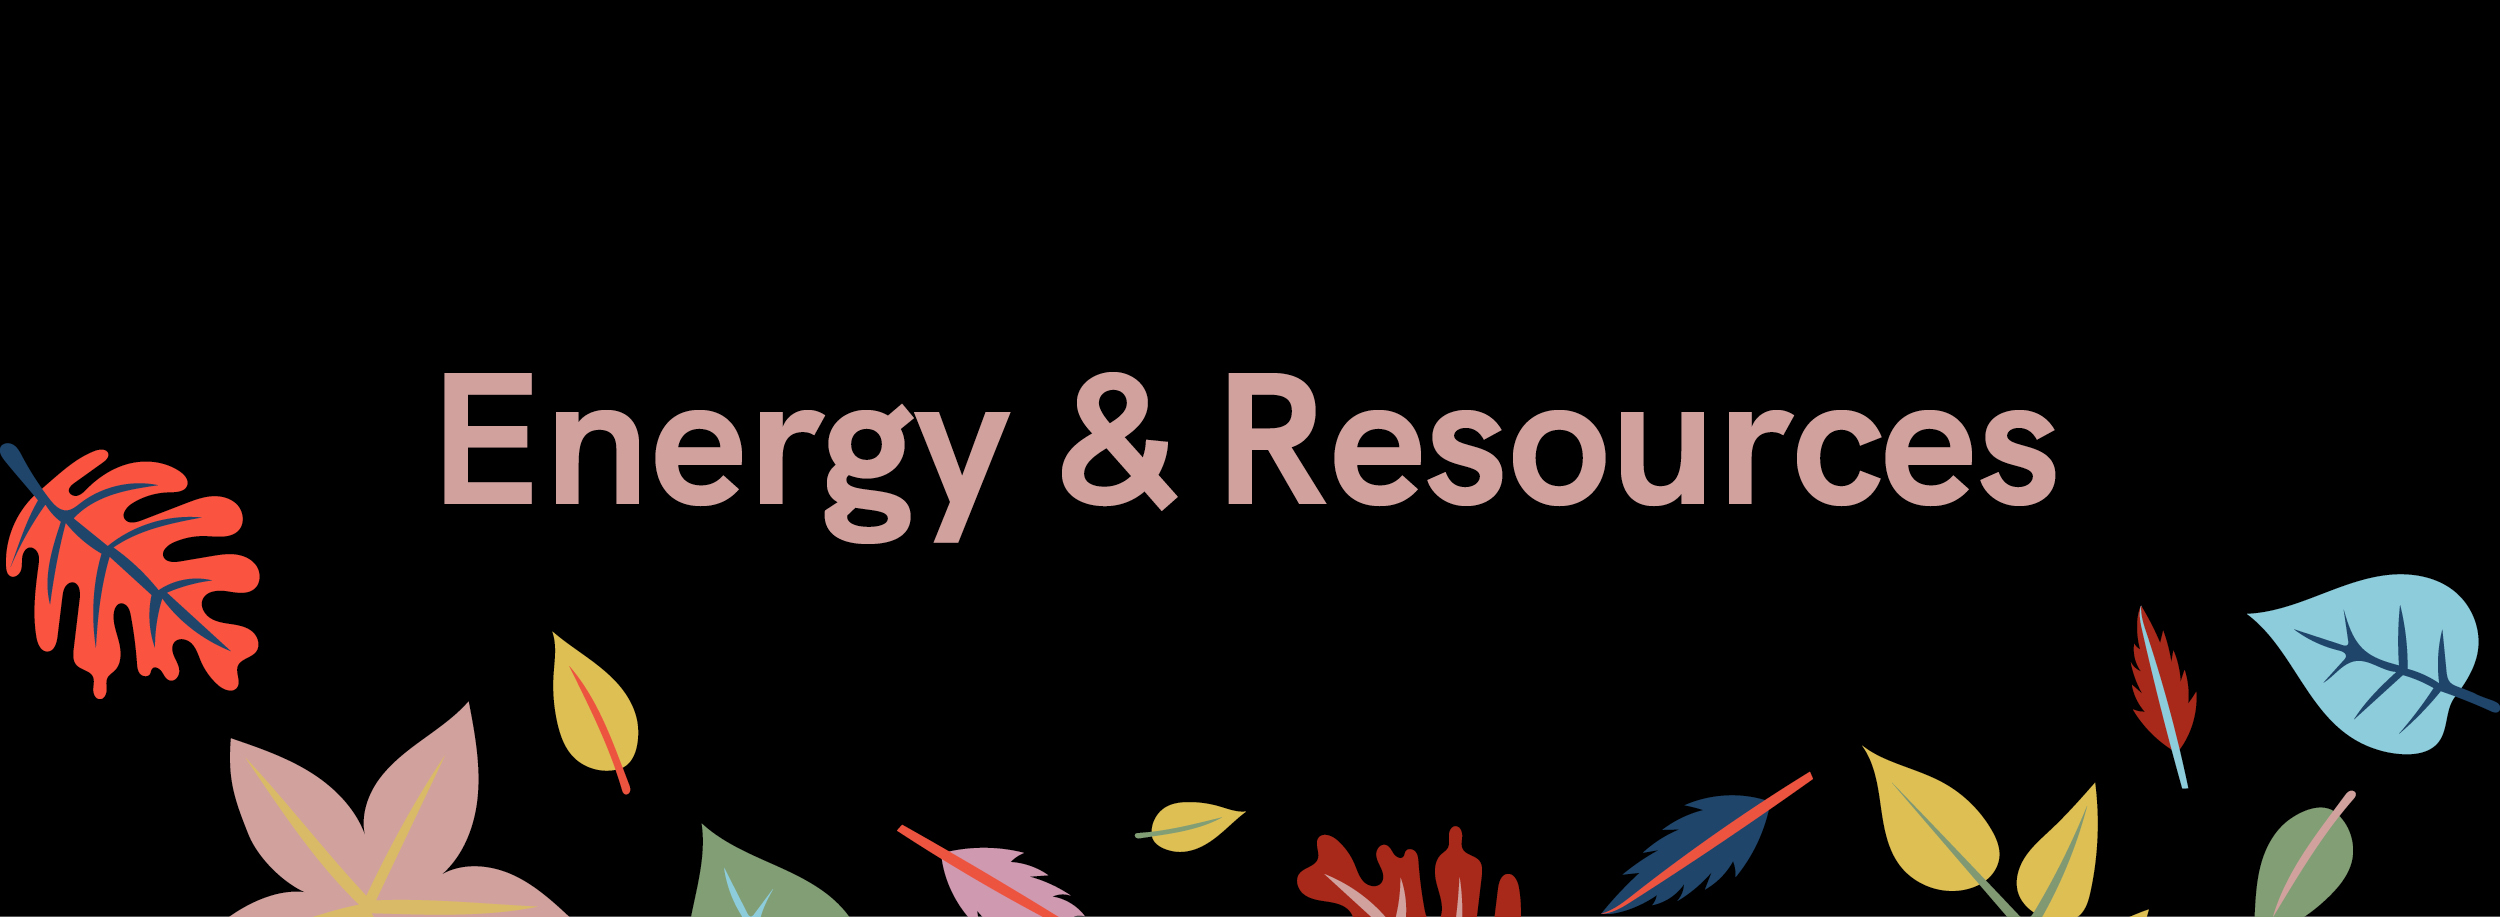 Energy and resources